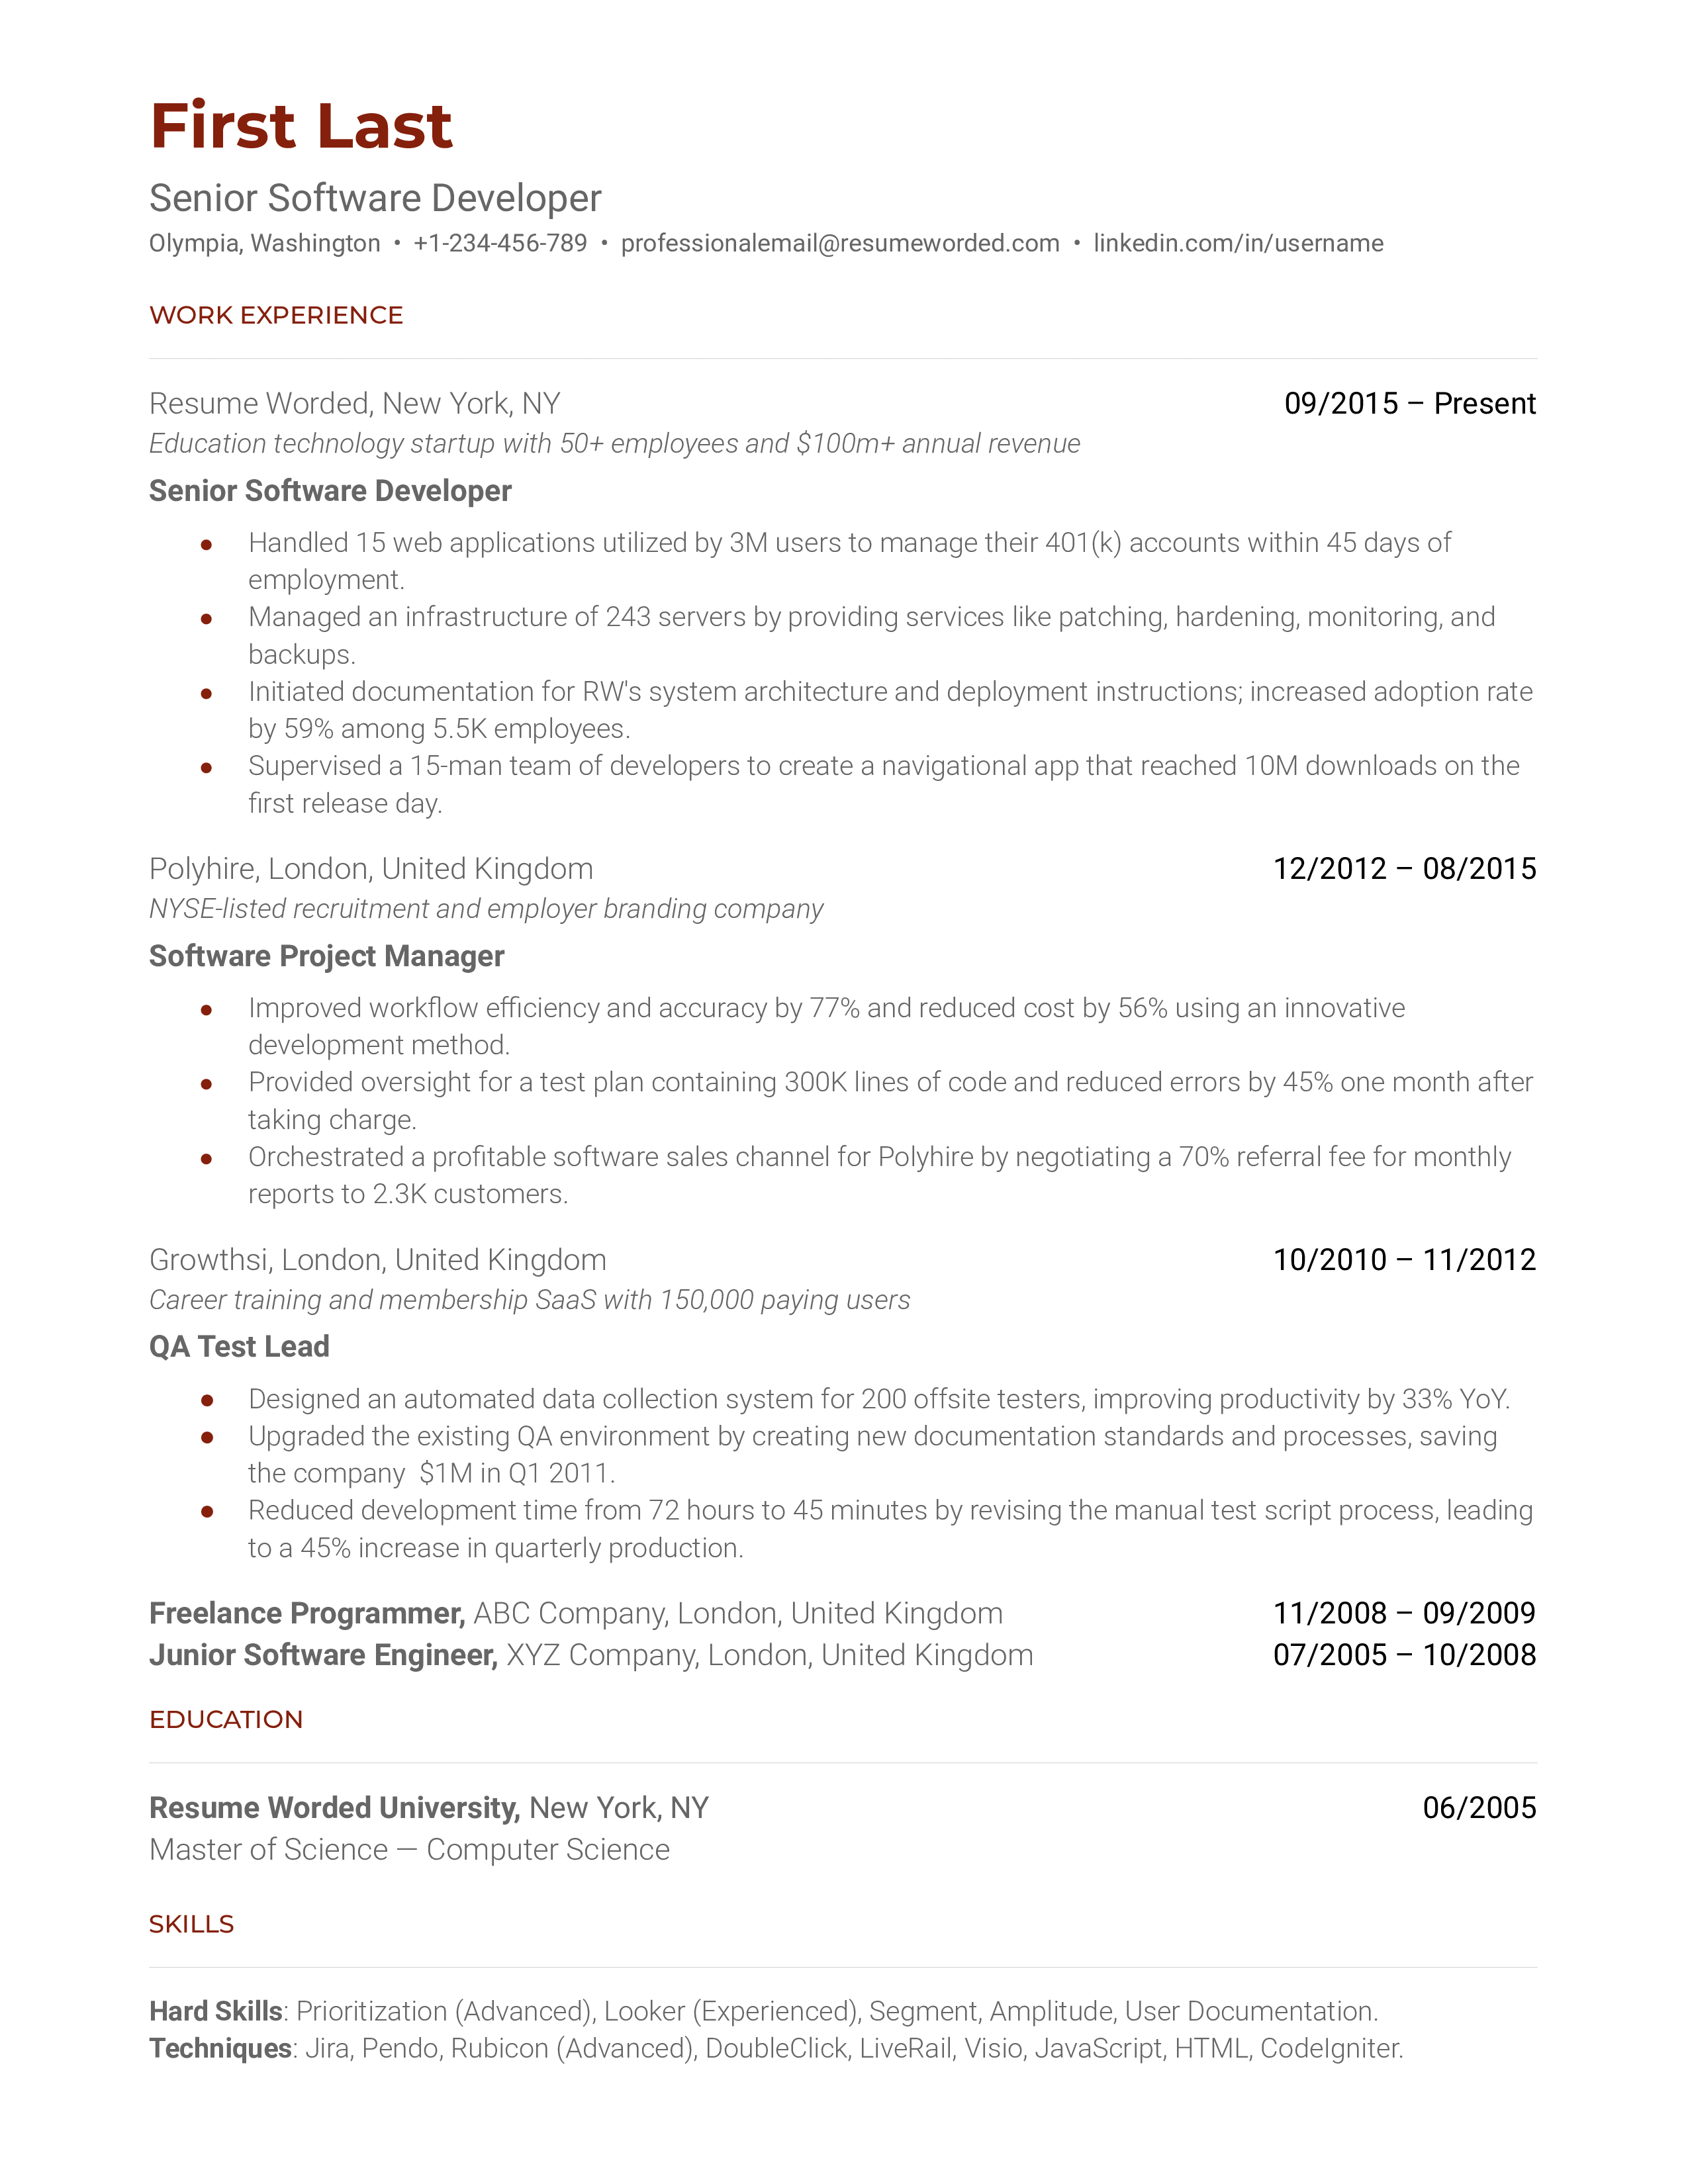 A senior software developer resume example that uses bullet points and strong action verbs